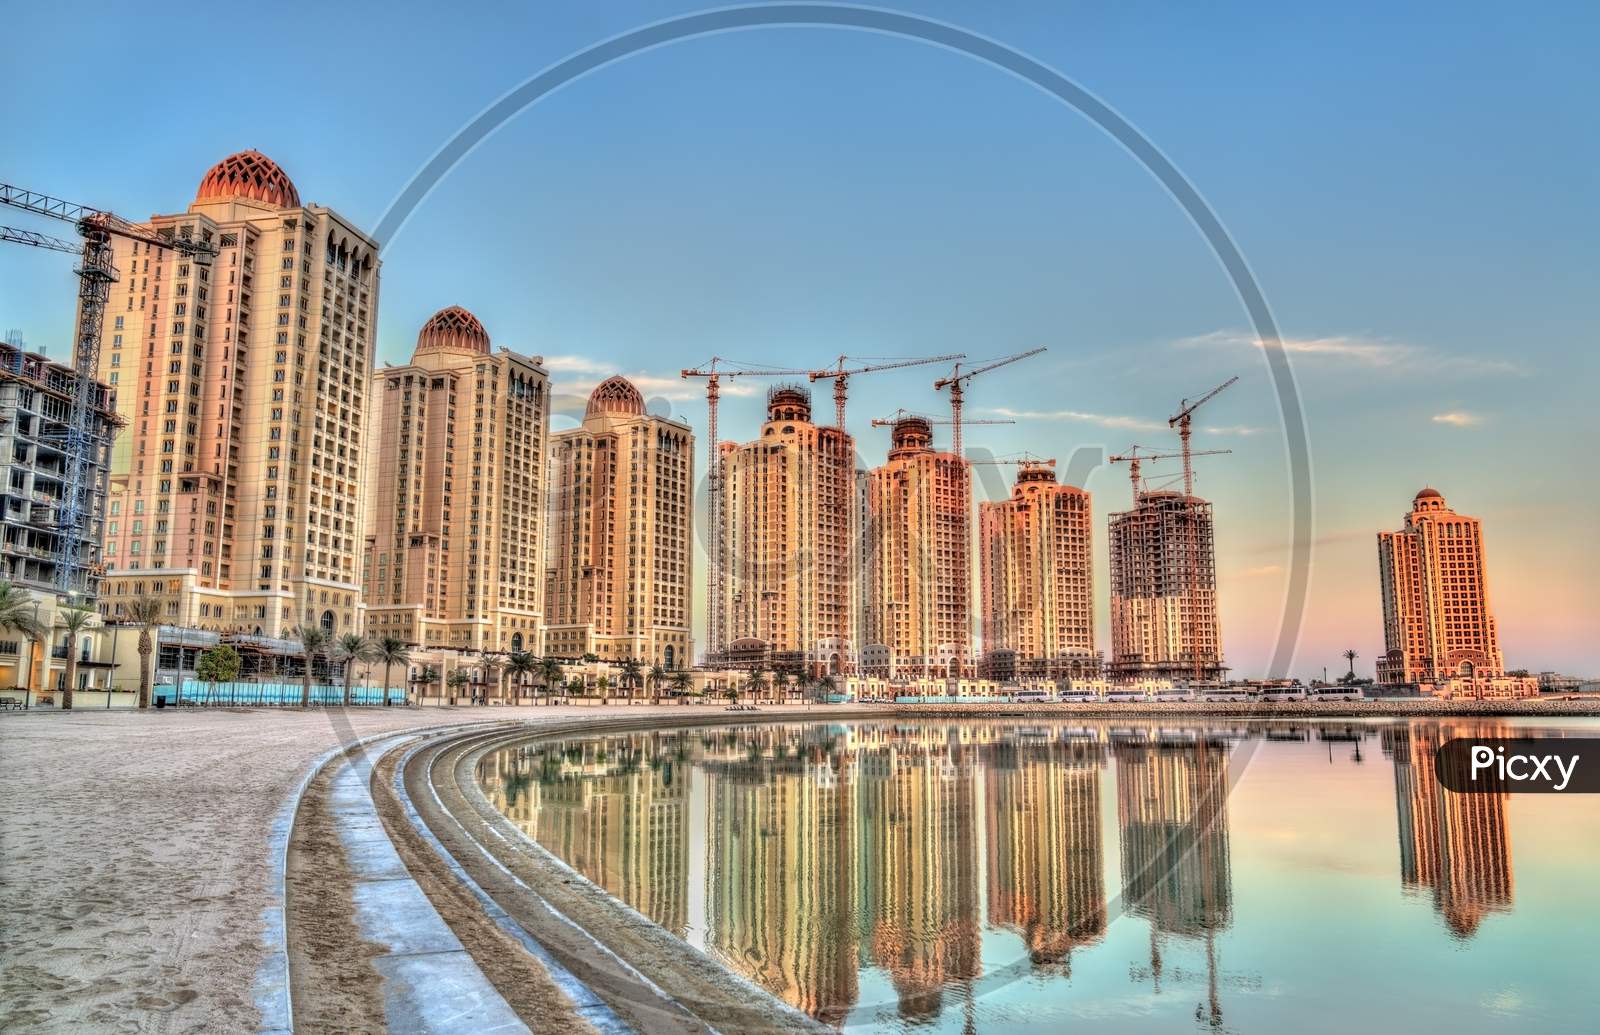 Residential Buildings On The Pearl, An Artificial Island In Doha, Qatar